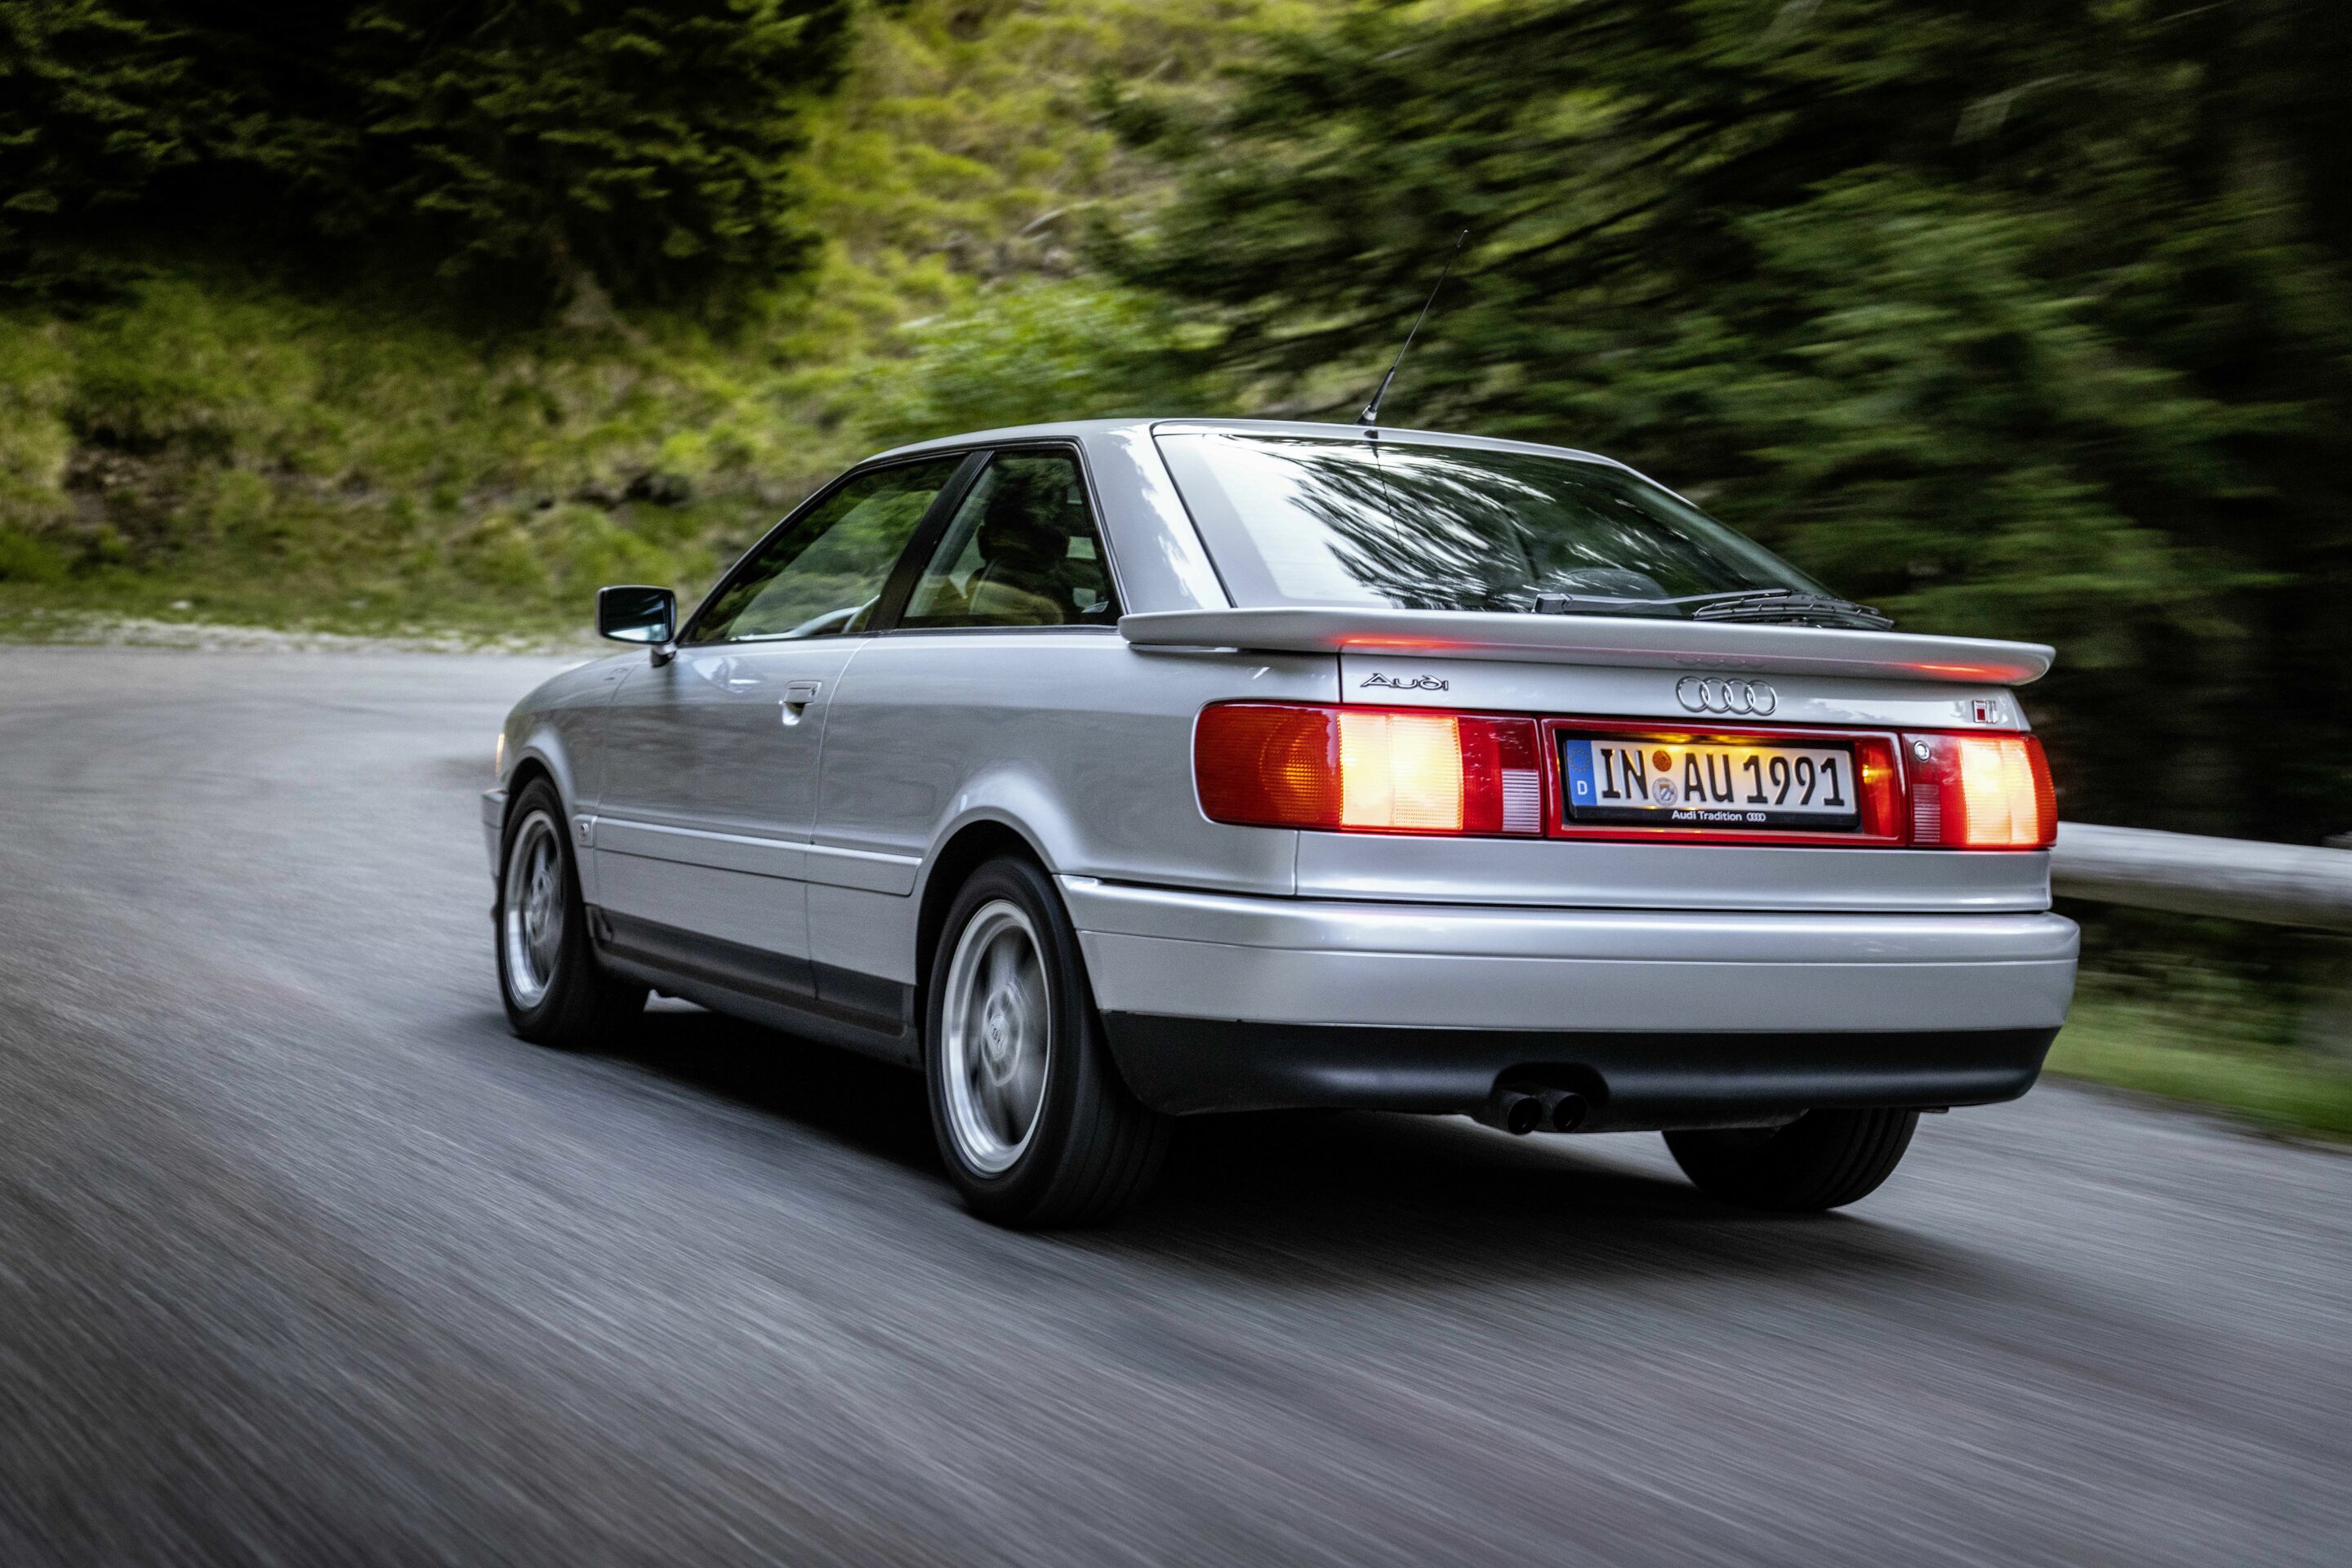 2.5 TFSI: Audi’s most powerful series five-cylinder